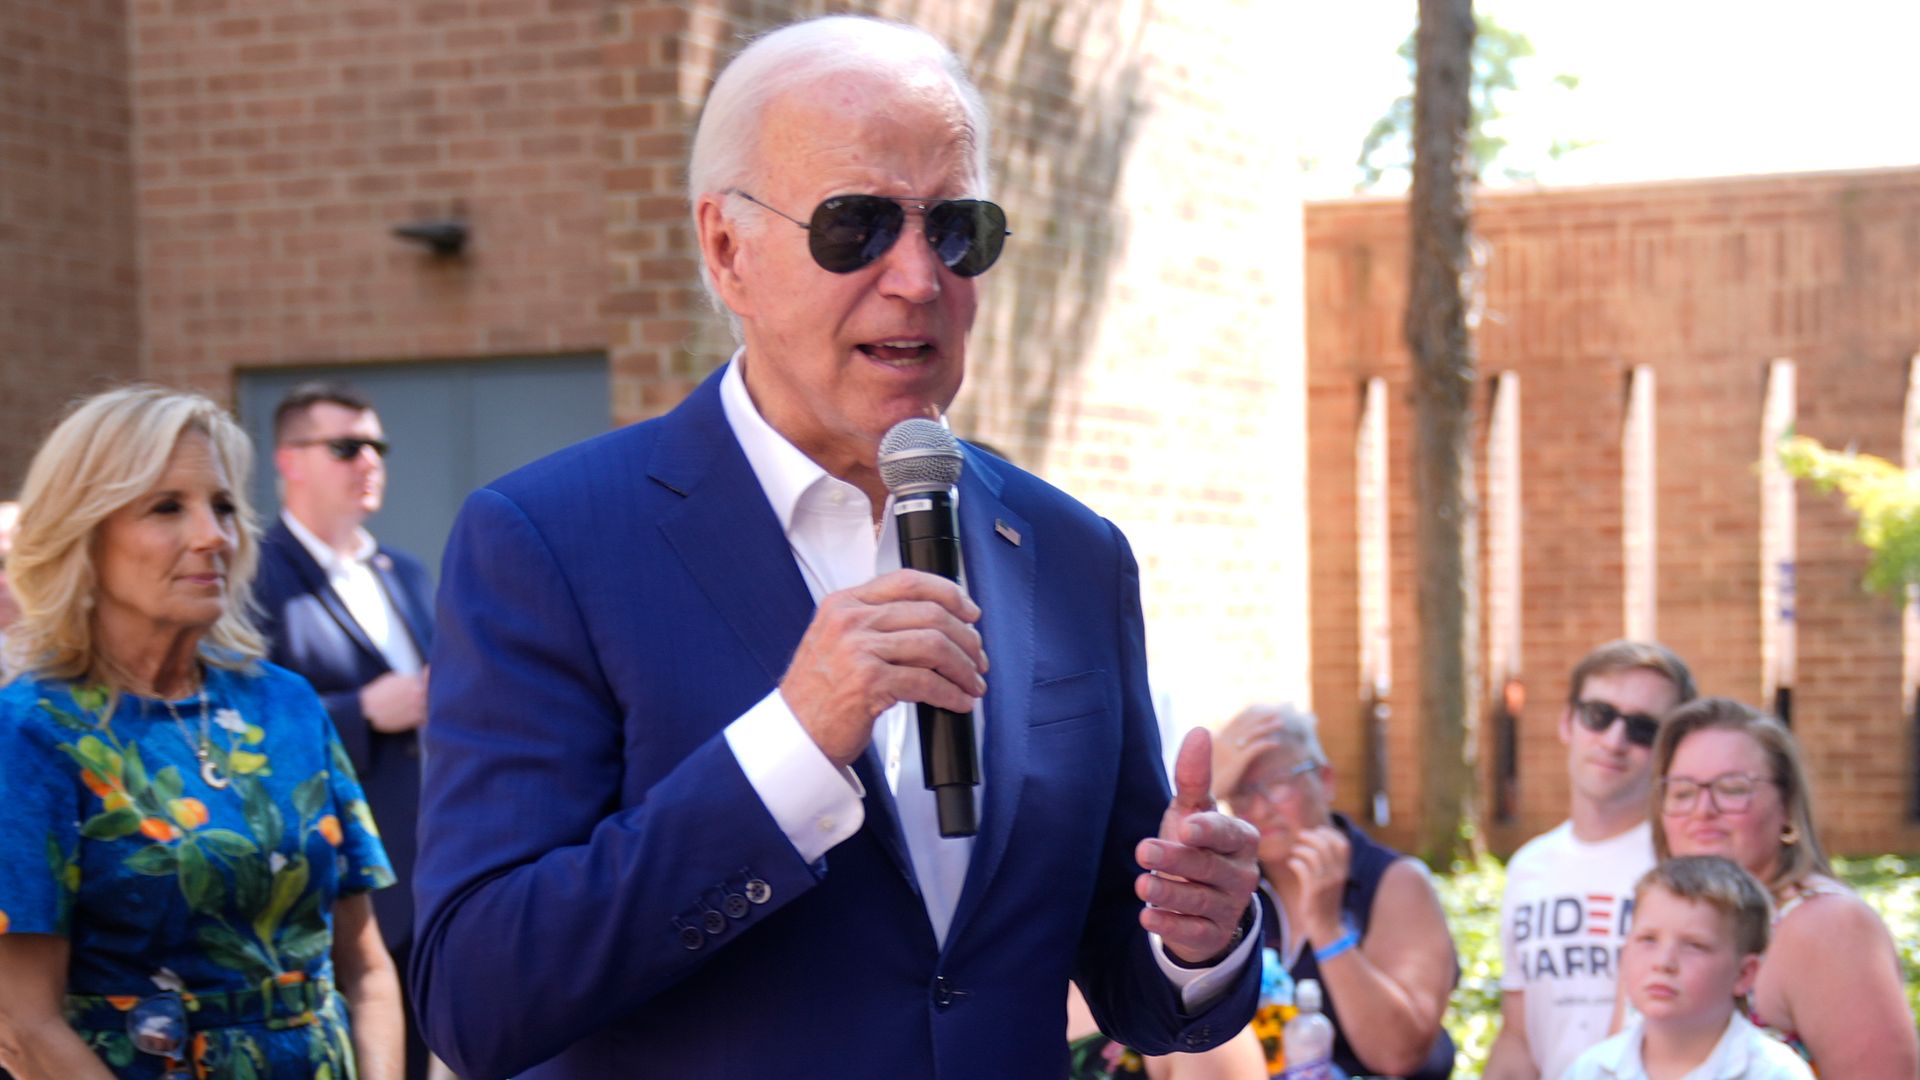 Biden's doctor reveals findings of 'extremely detailed neurological exam'